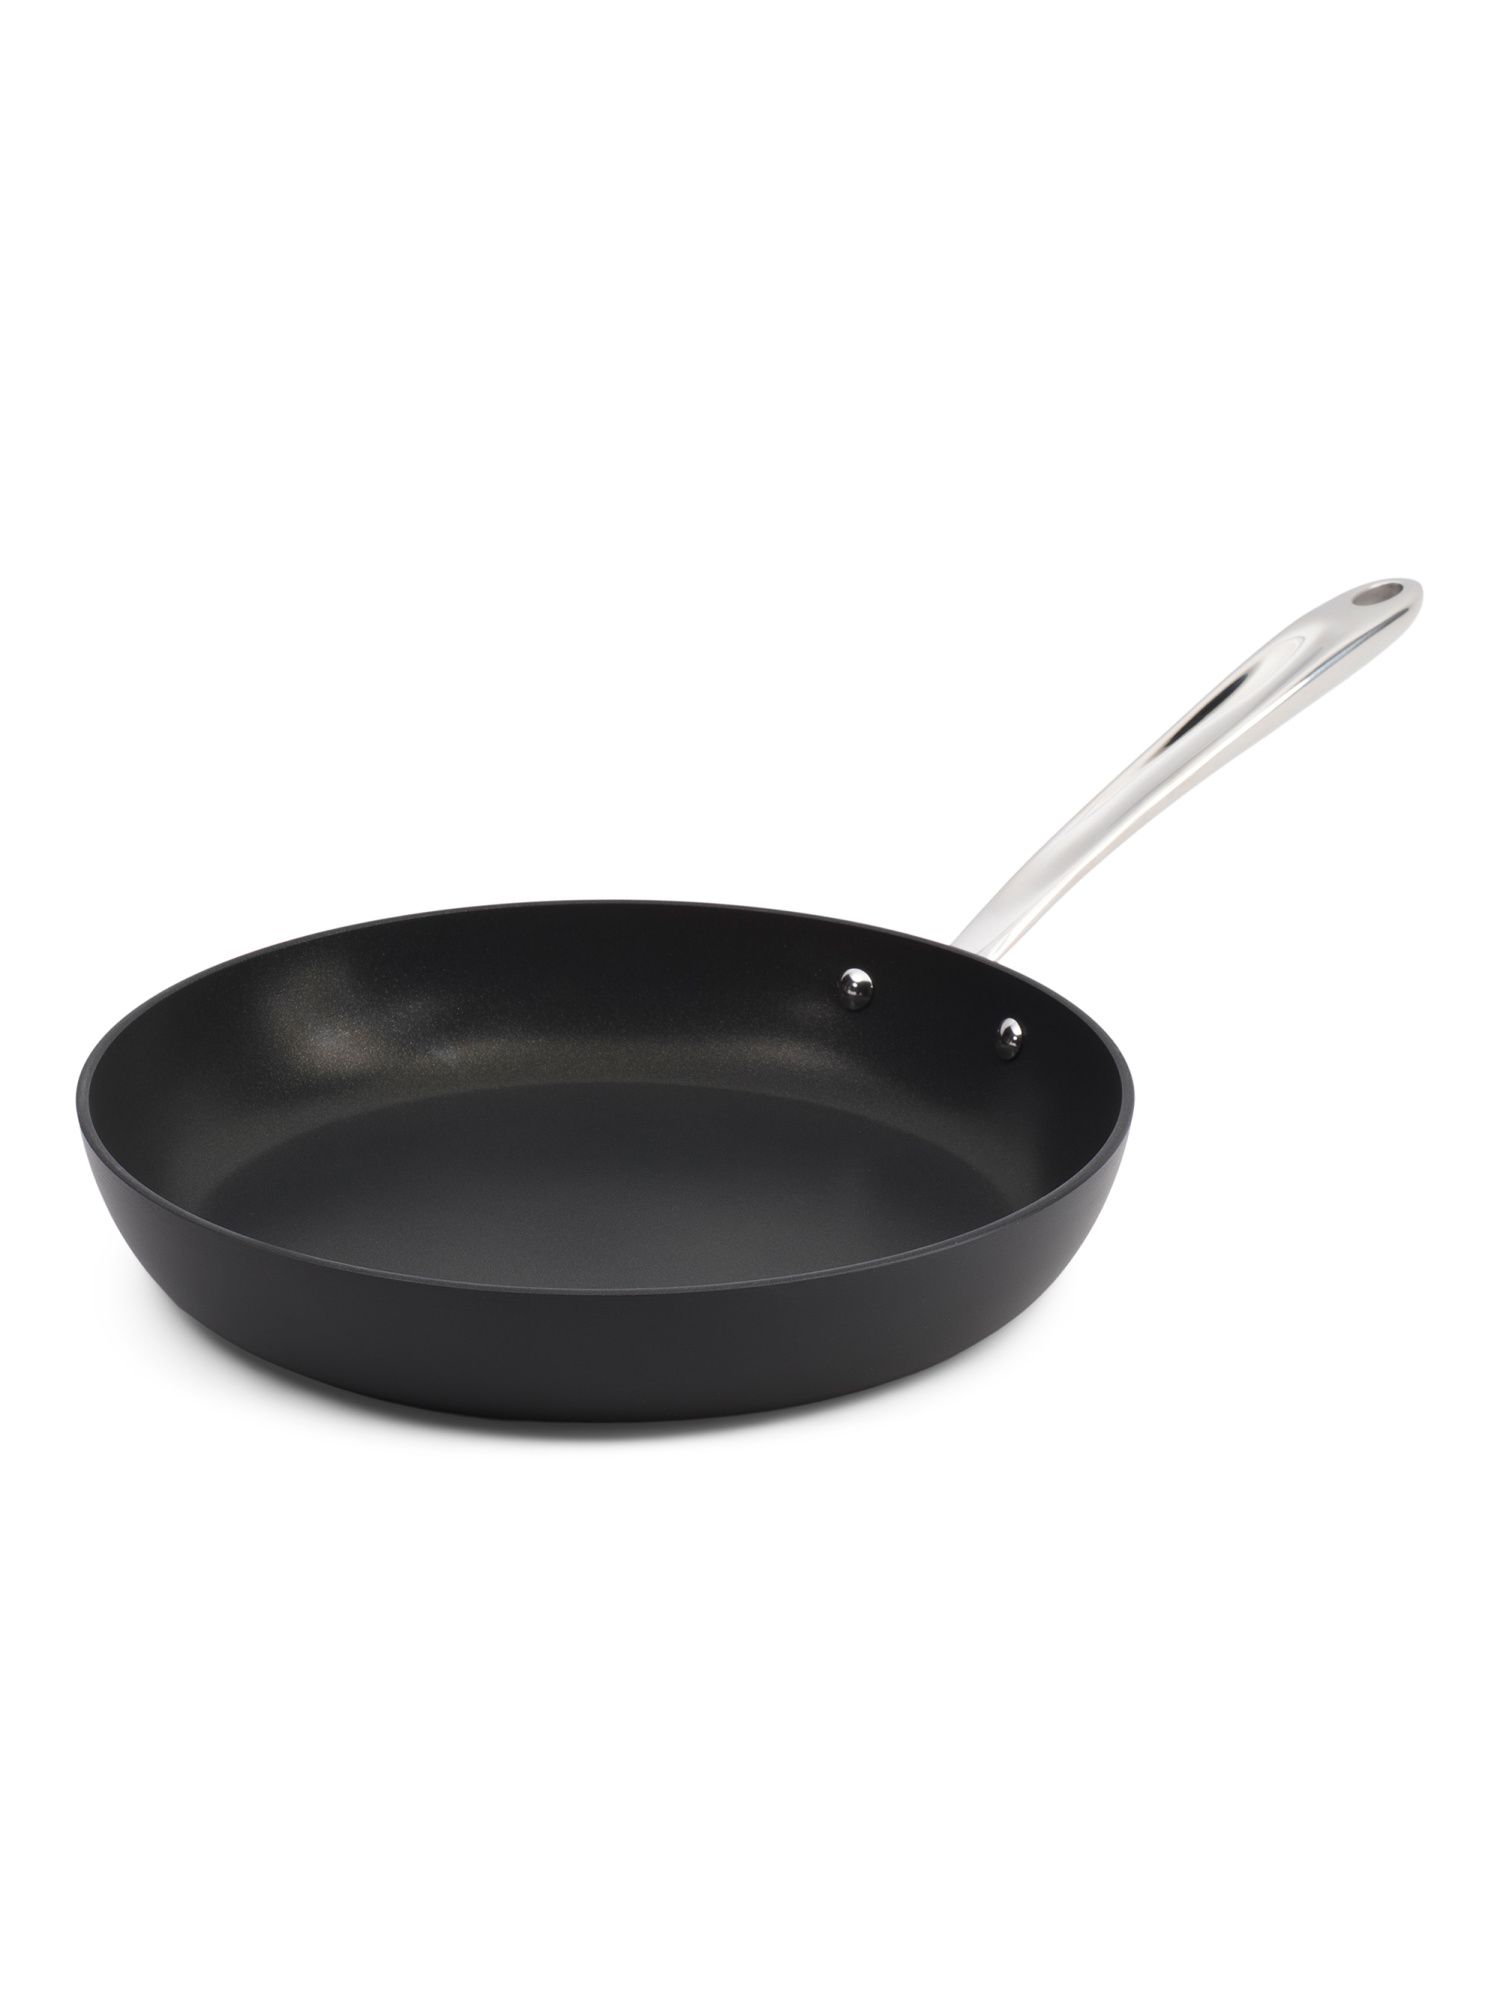 12in Essentials Nonstick Fry Pan Slightly Blemished | Home | Marshalls | Marshalls